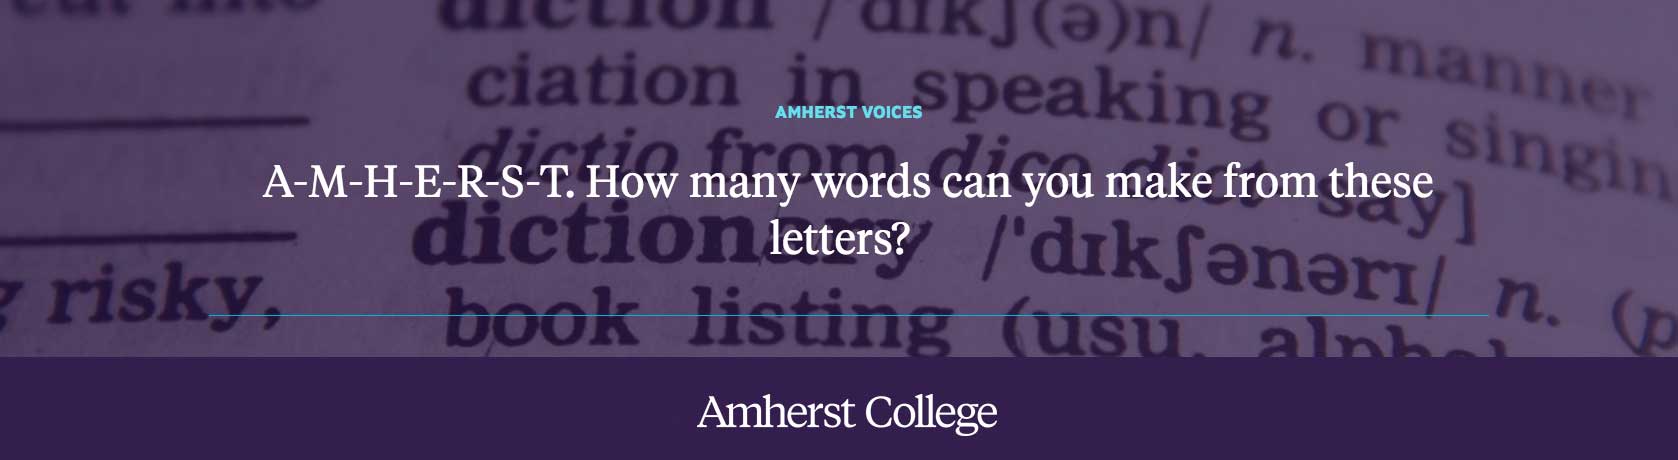 How many words can you make from these letters? A-M-H-E-R-S-T